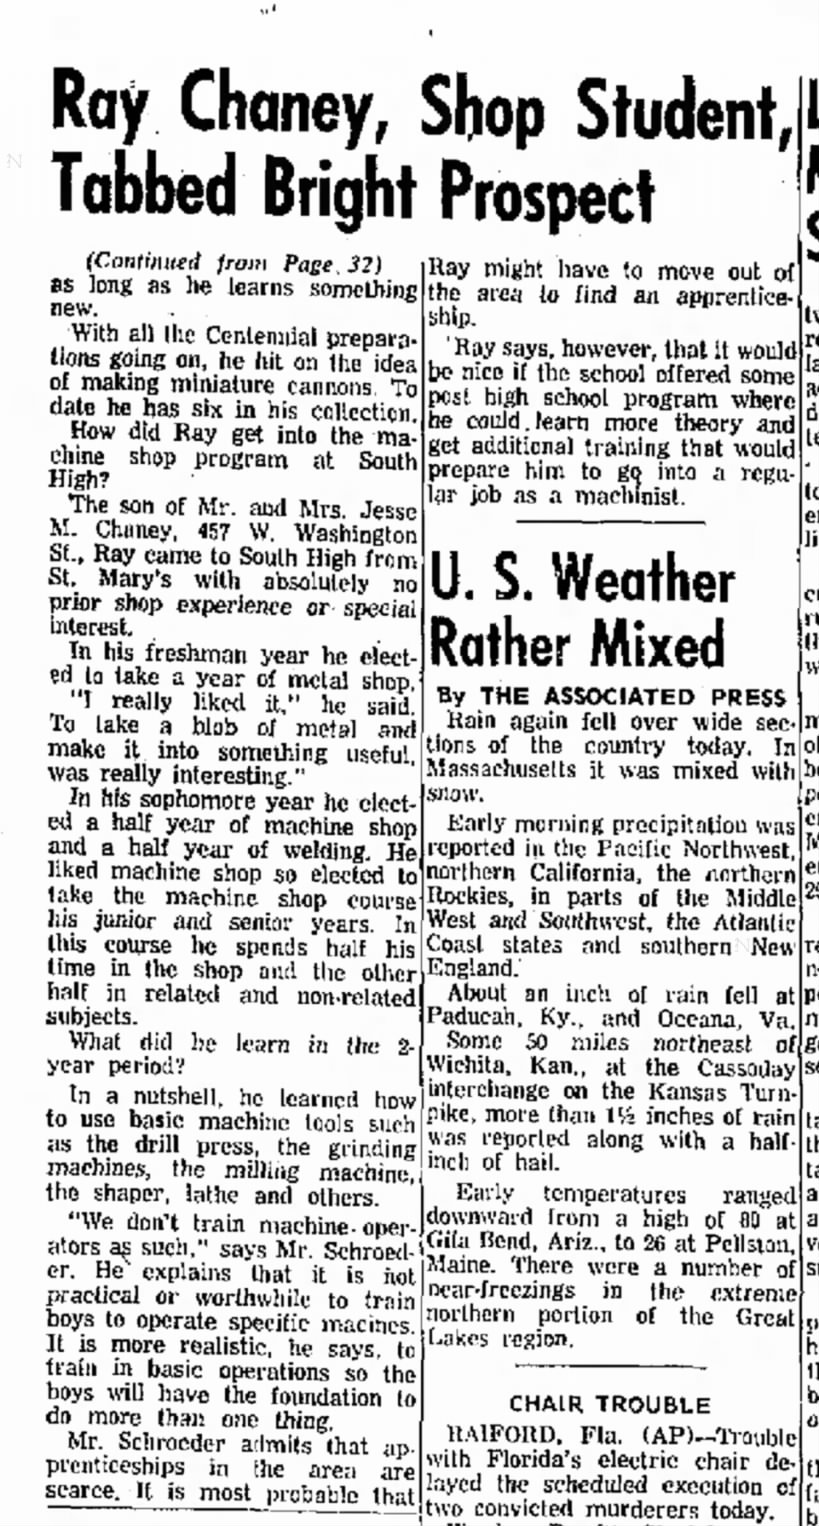 The Daily Mail, Hagerstown, MD., Wednesday, May 9, 1962, page 3 (continued from page 32).